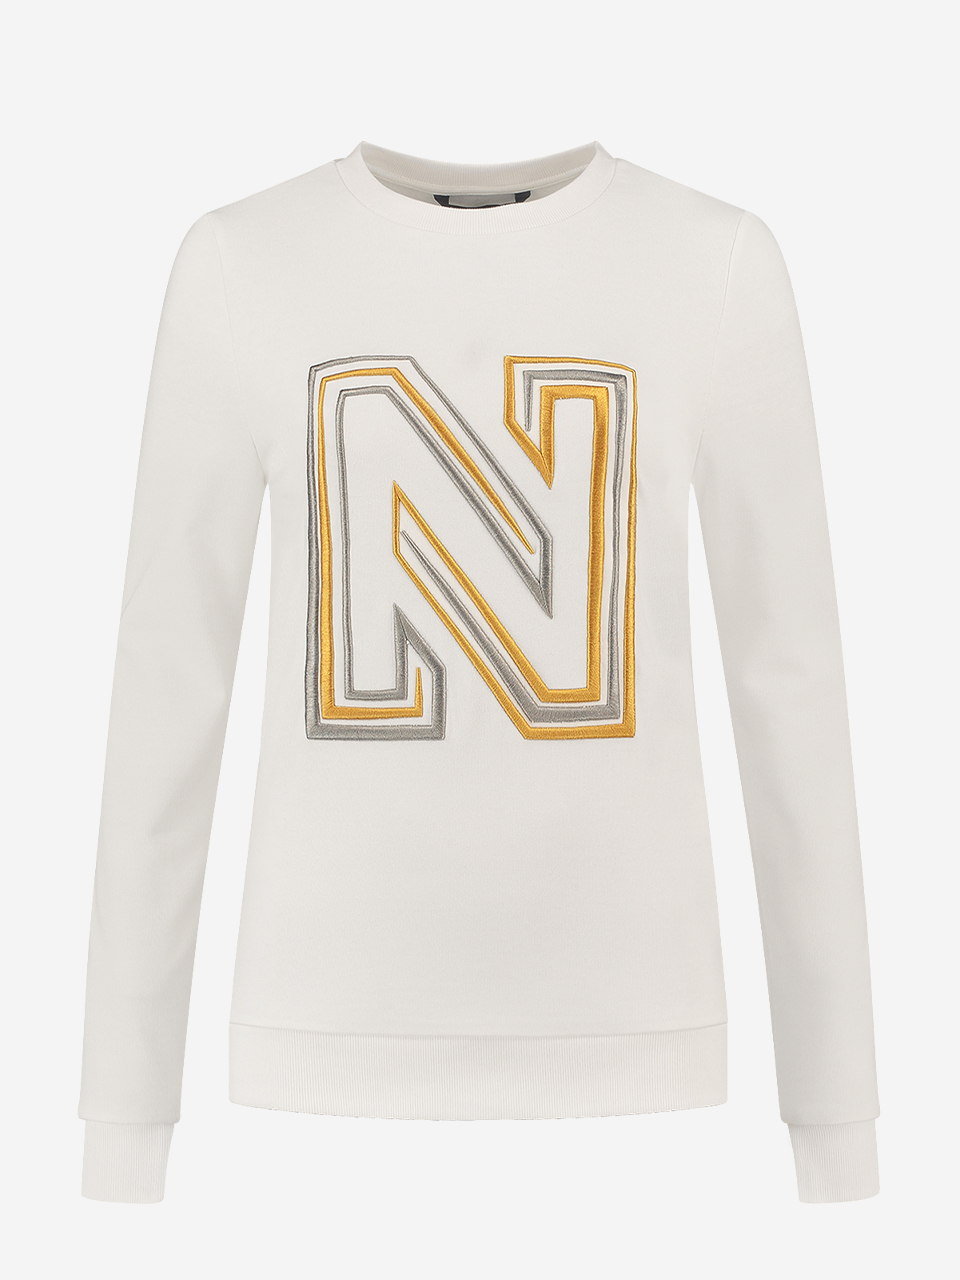 N Logo Embroidery Sweater